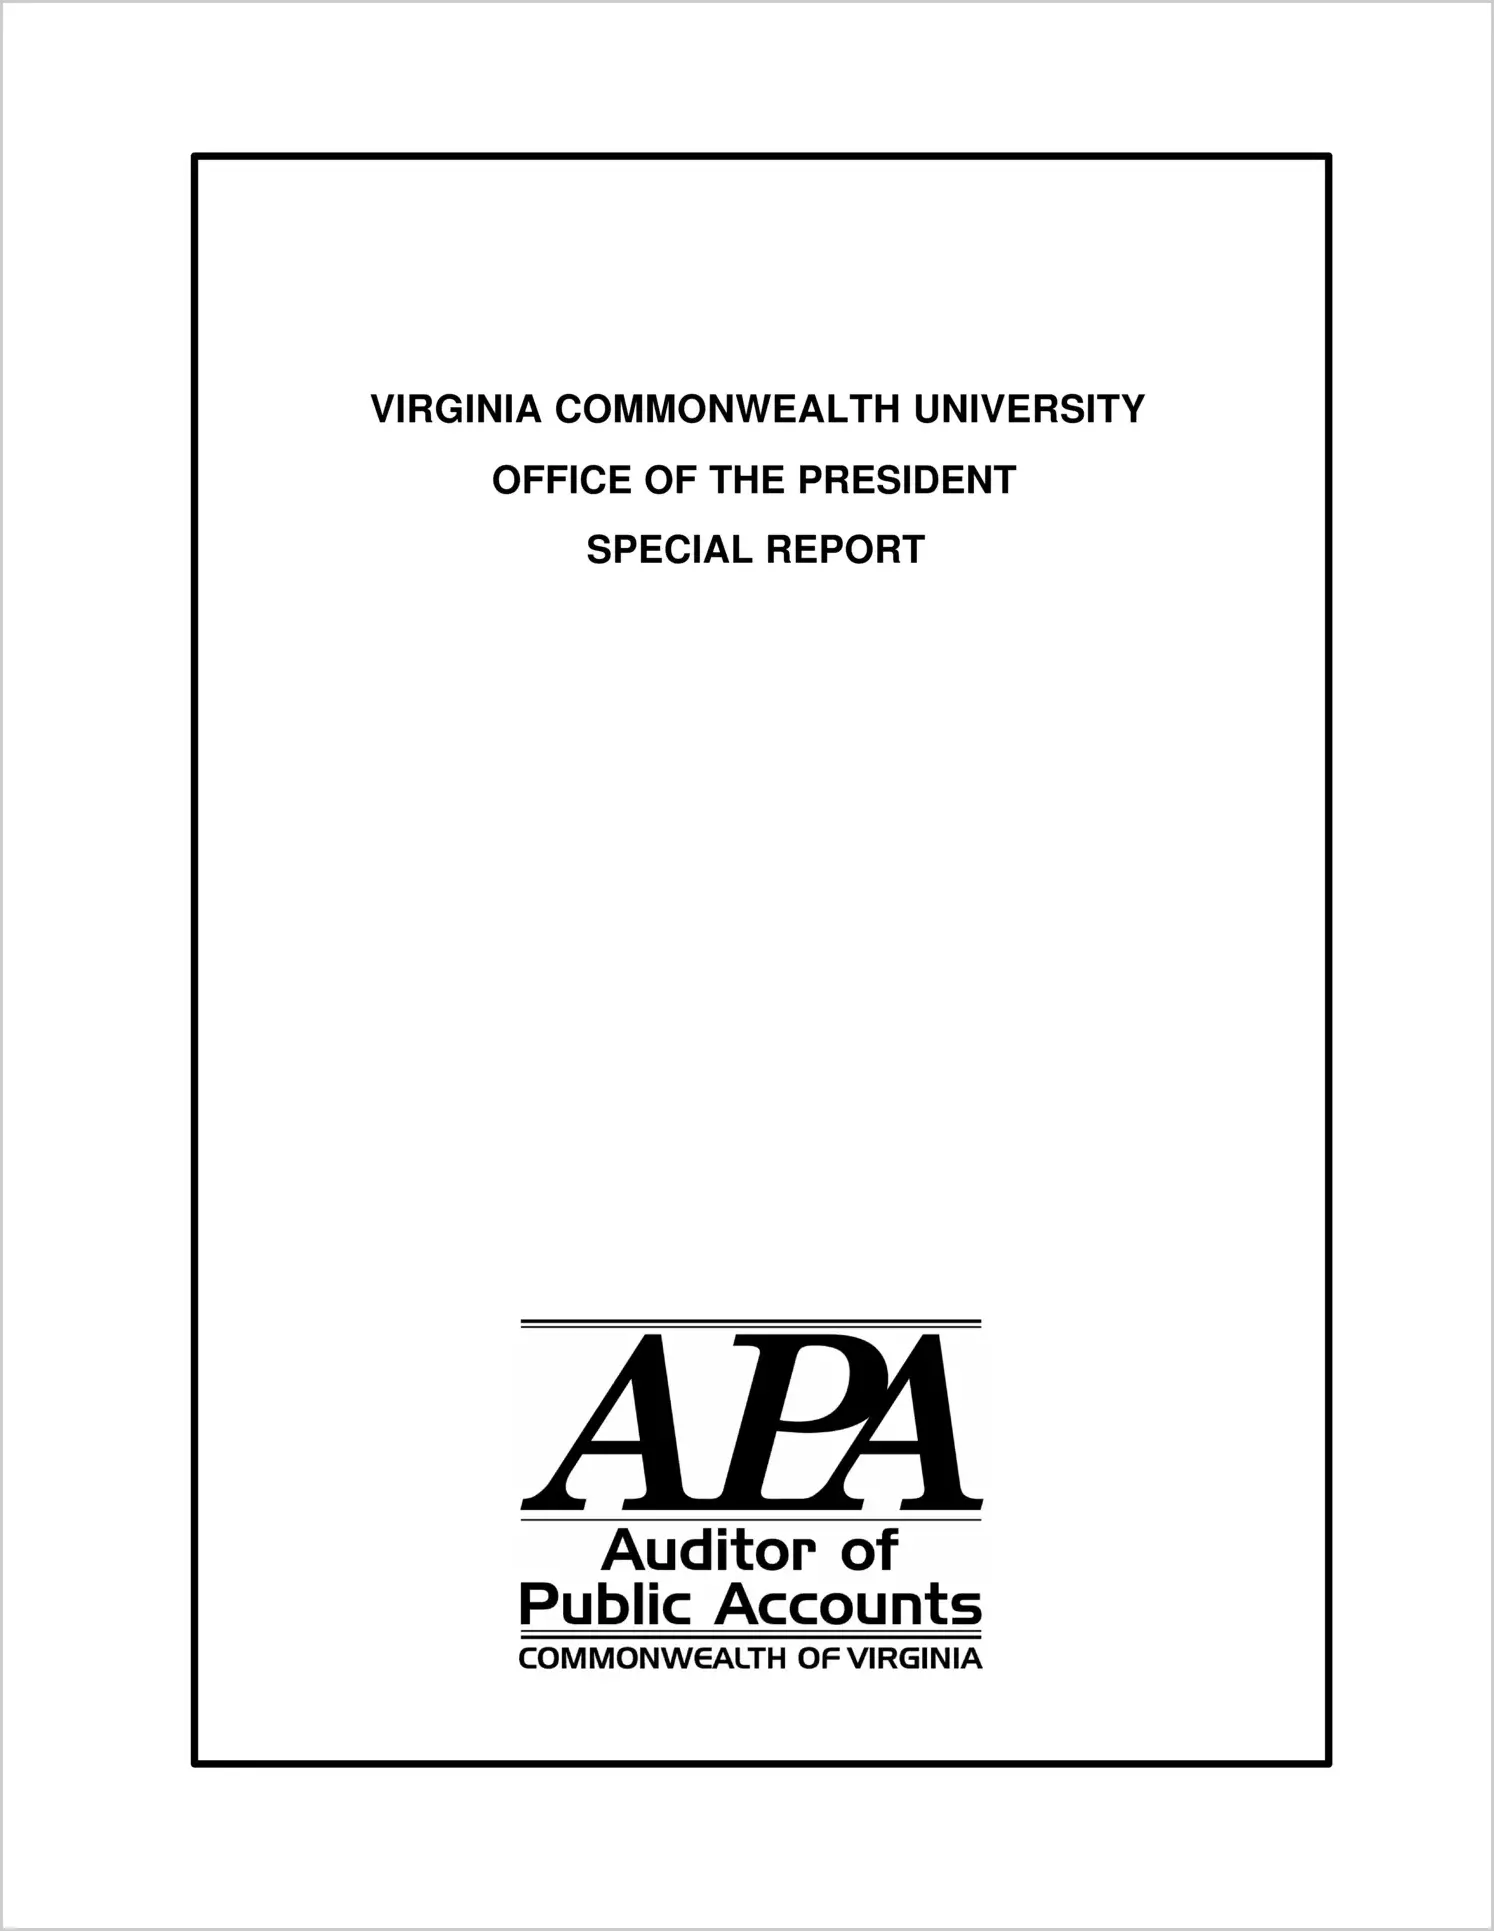 Special ReportVirginia Commonwealth University Office of the President Special Report(Report Date: November 2003)